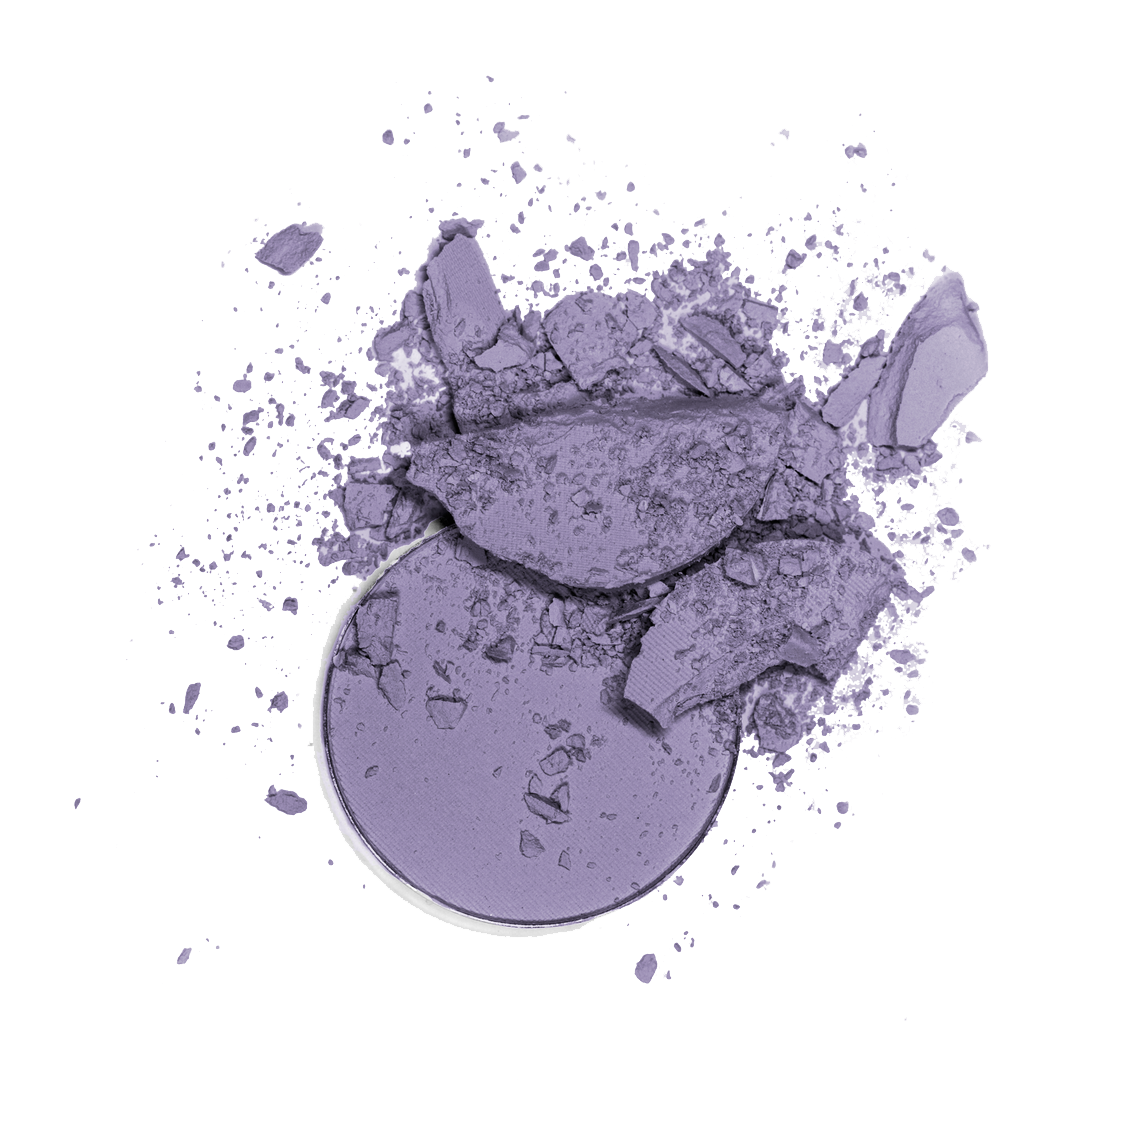 Eyeshadow PNG Picture pngteam.com